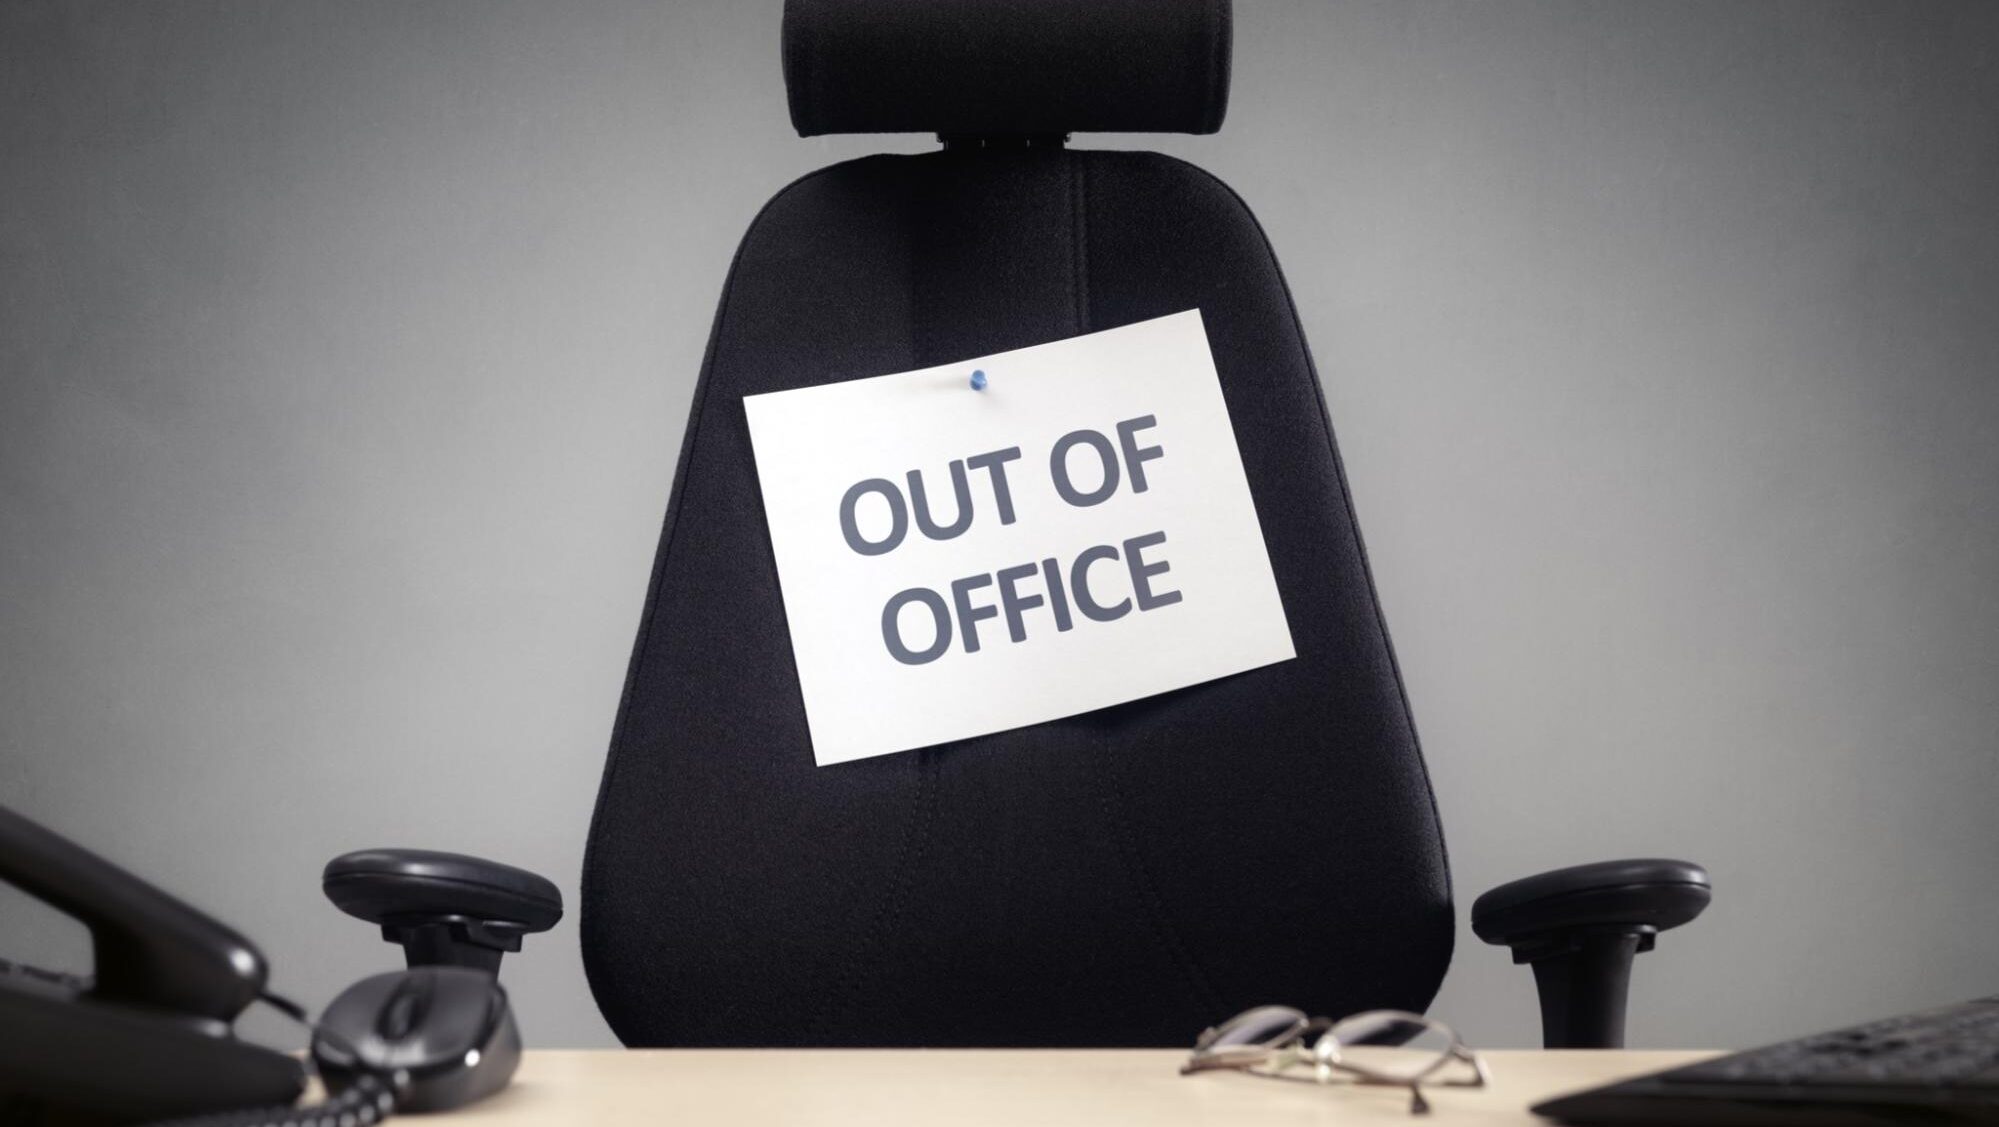 Chair with out of office sign